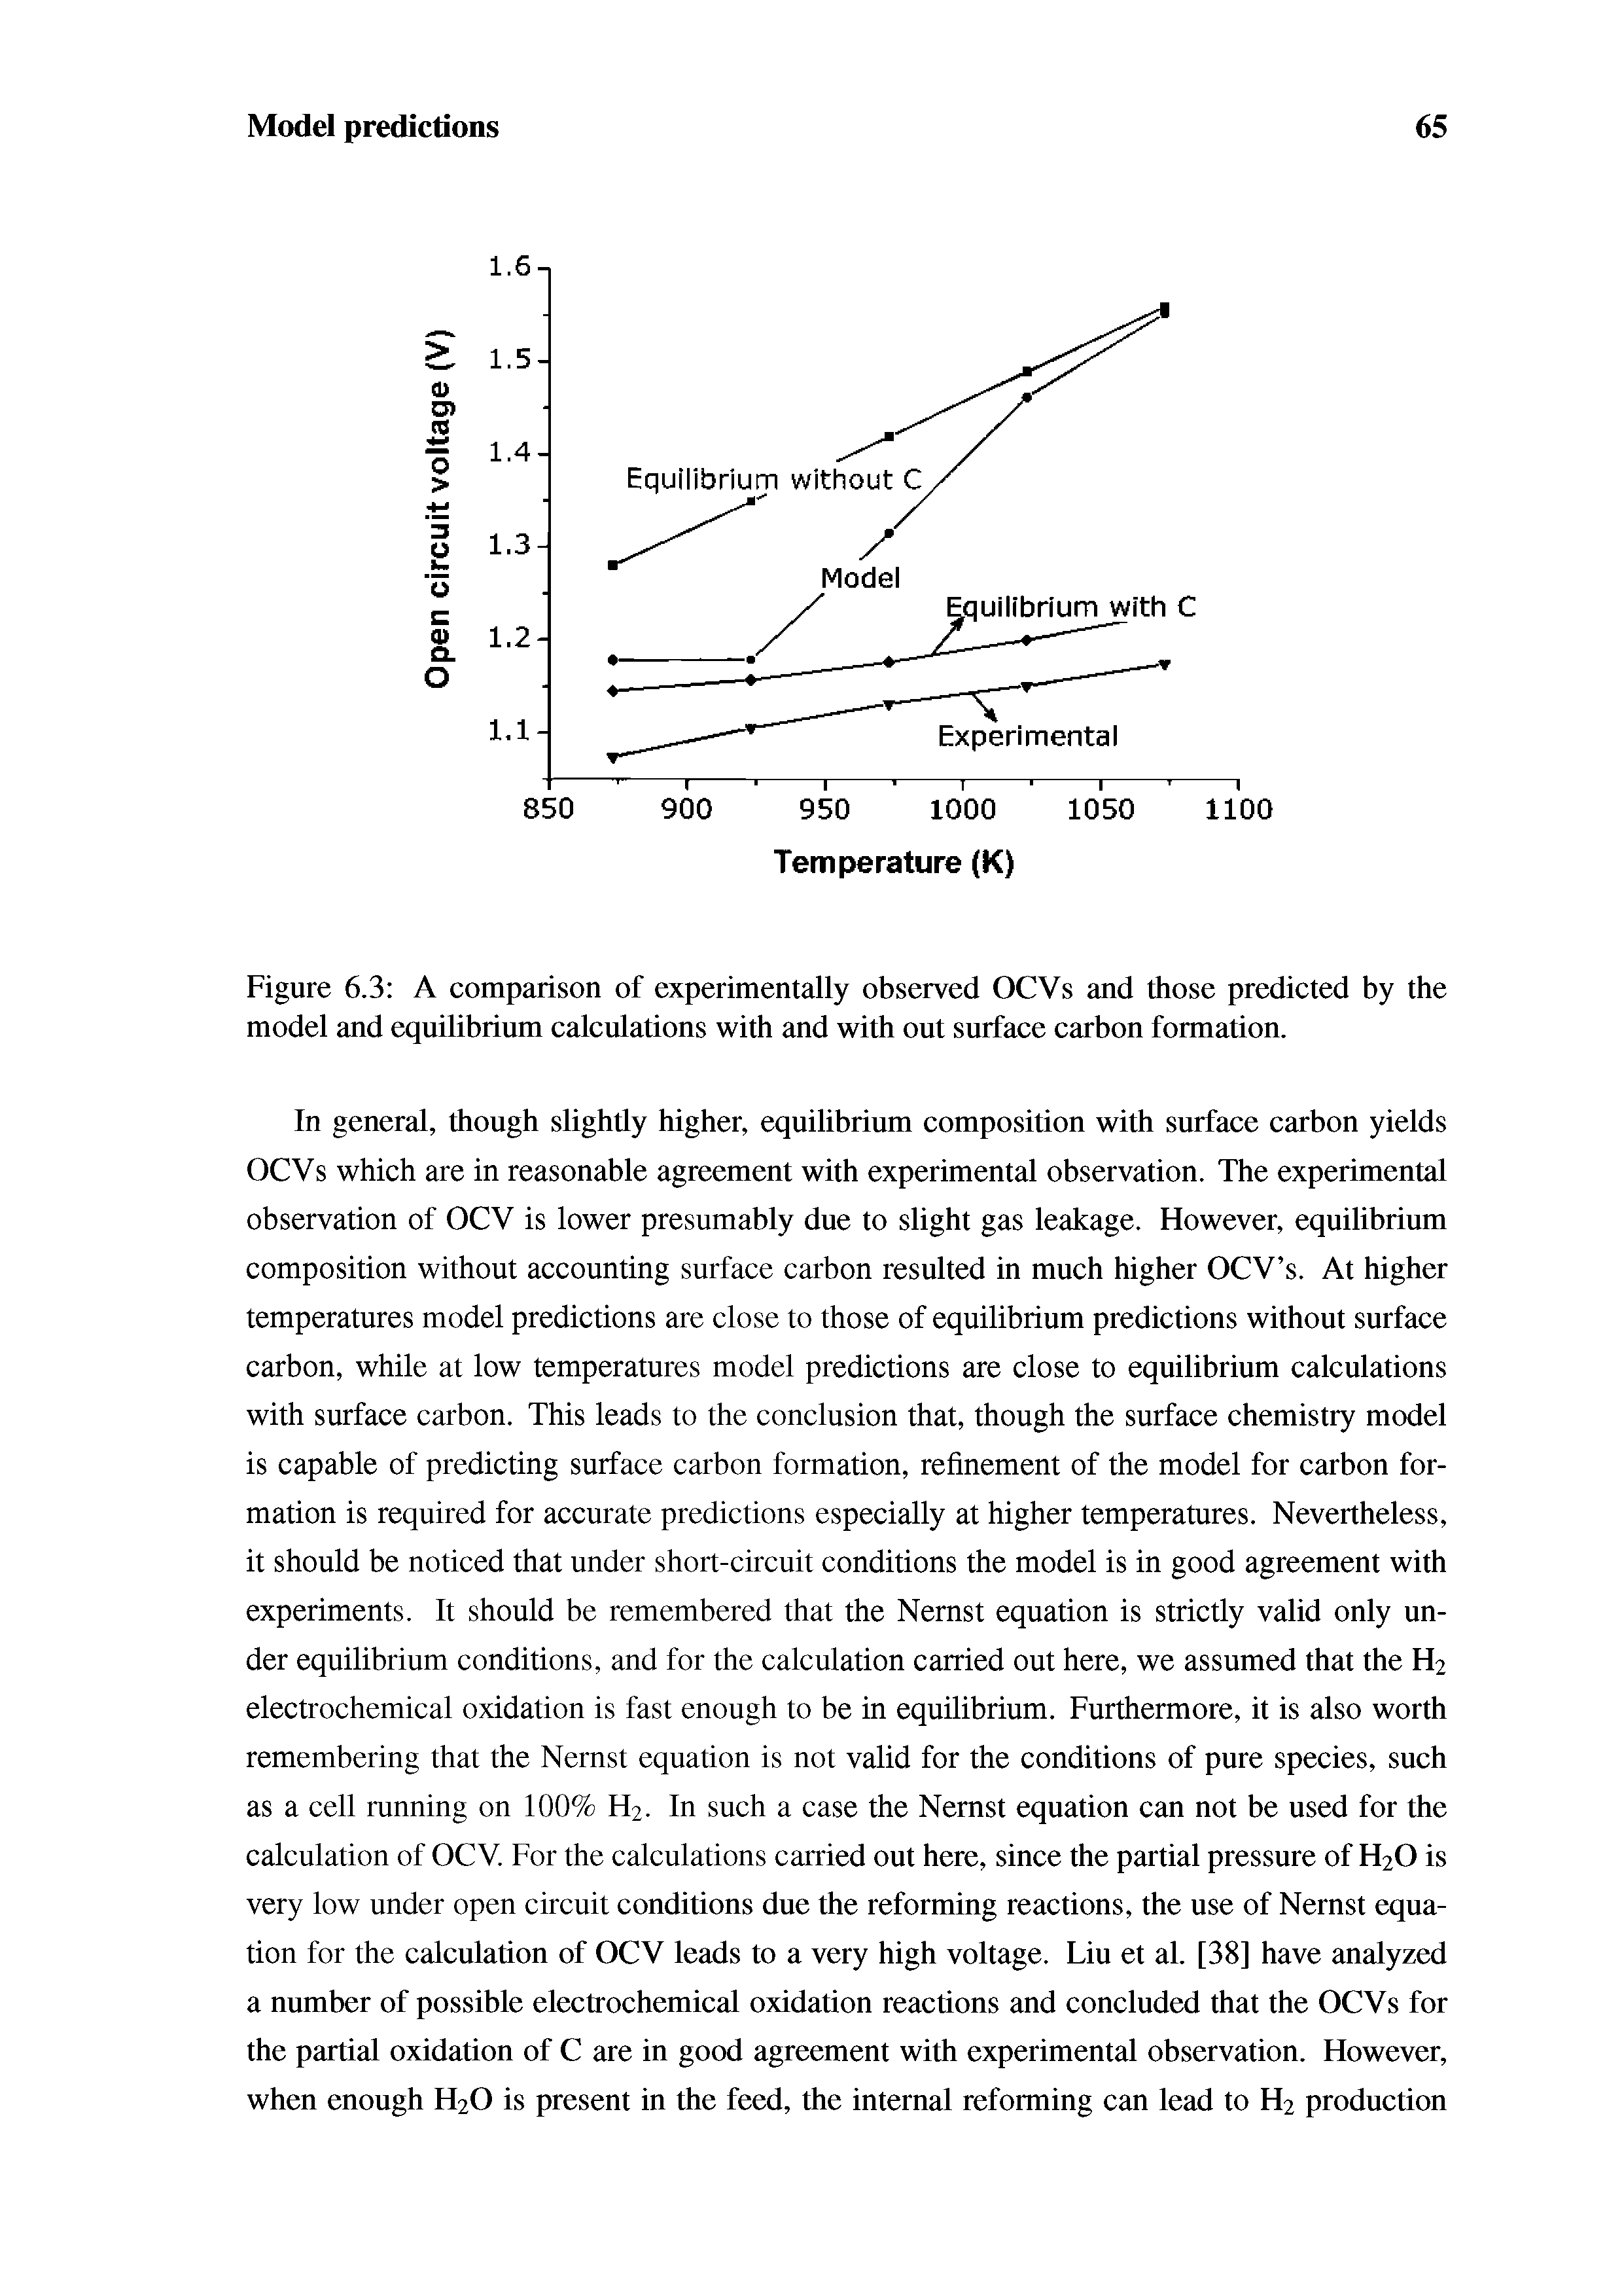 Figure 6.3 A comparison of experimentally observed OCVs and those predicted by the model and equilibrium calculations with and with out surface carbon formation.